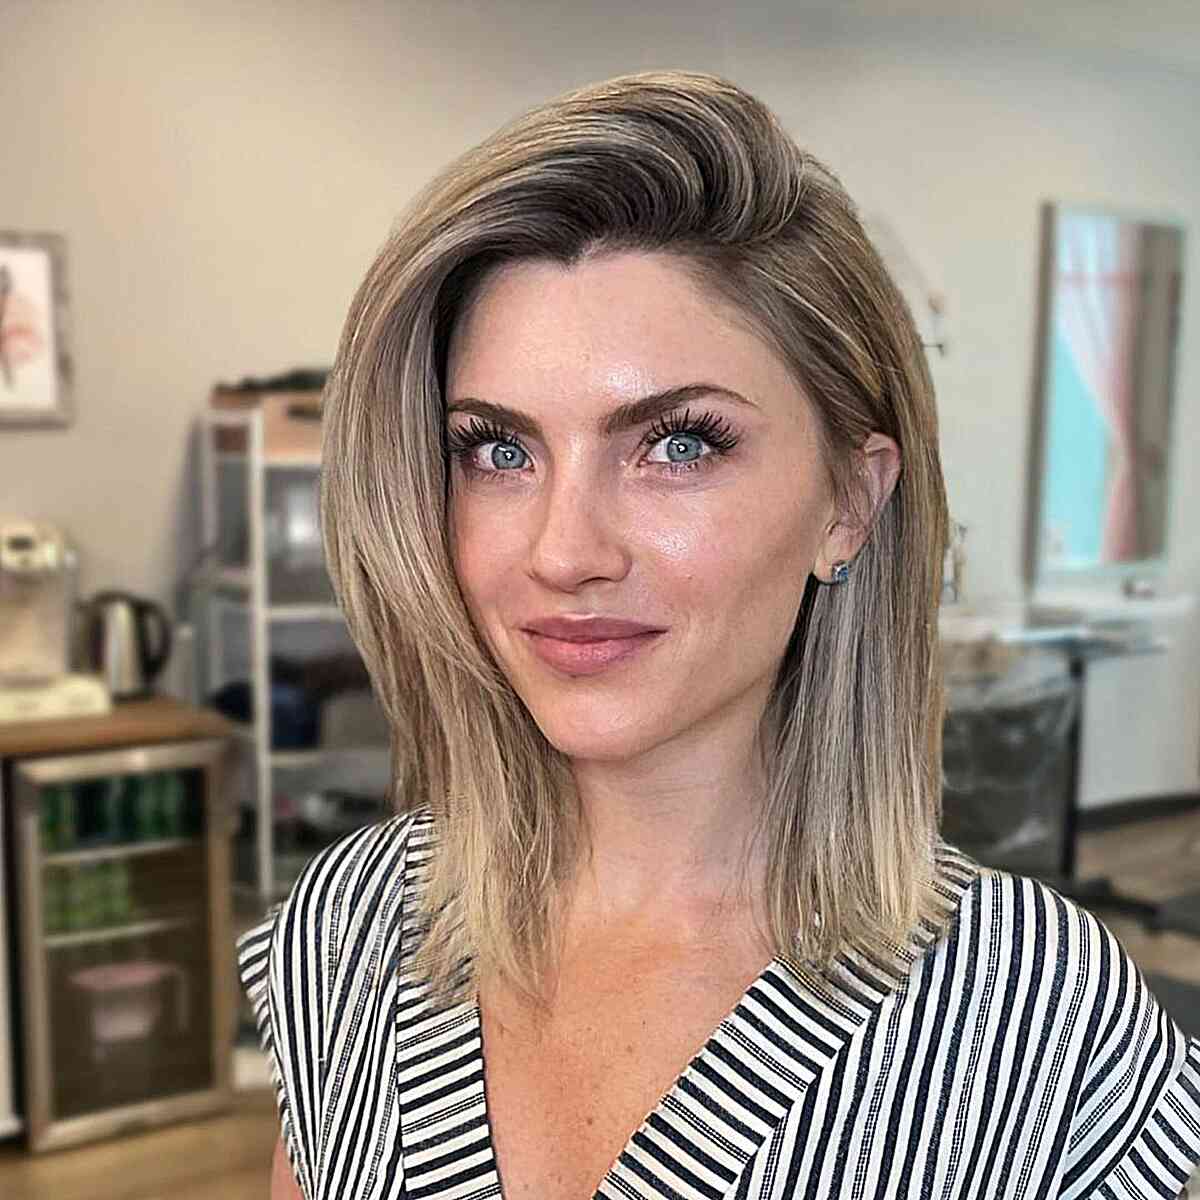 Shoulder-Length Bob Hairstyle for Women